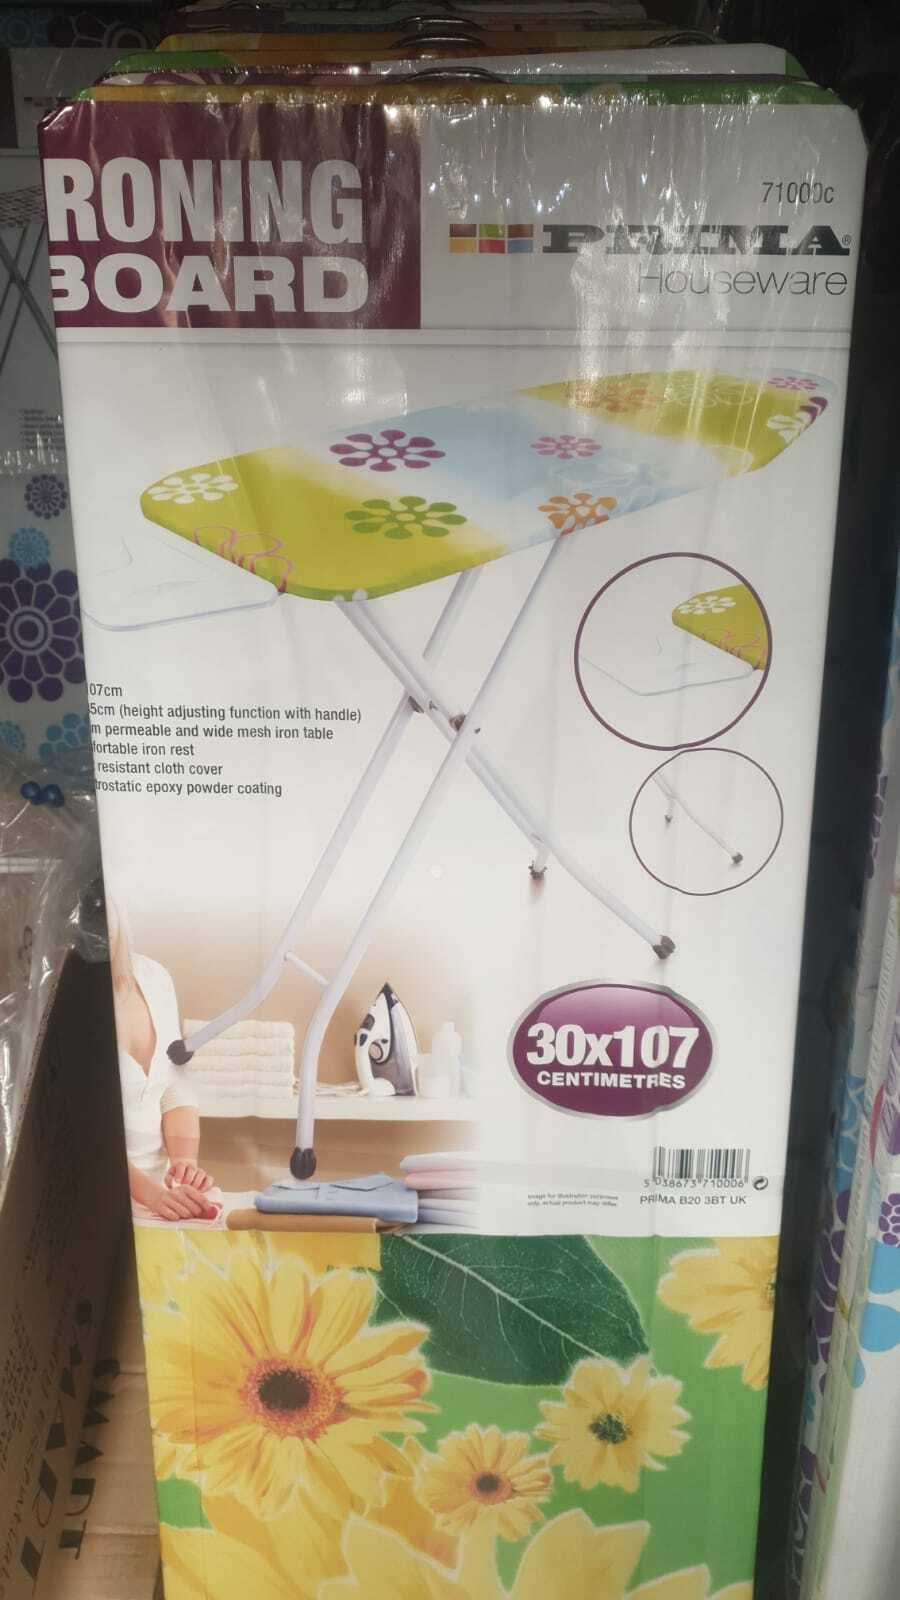 Ironing Board Lightweight Foldable Adjustable Table Wooden Top 42" Clothes Iron